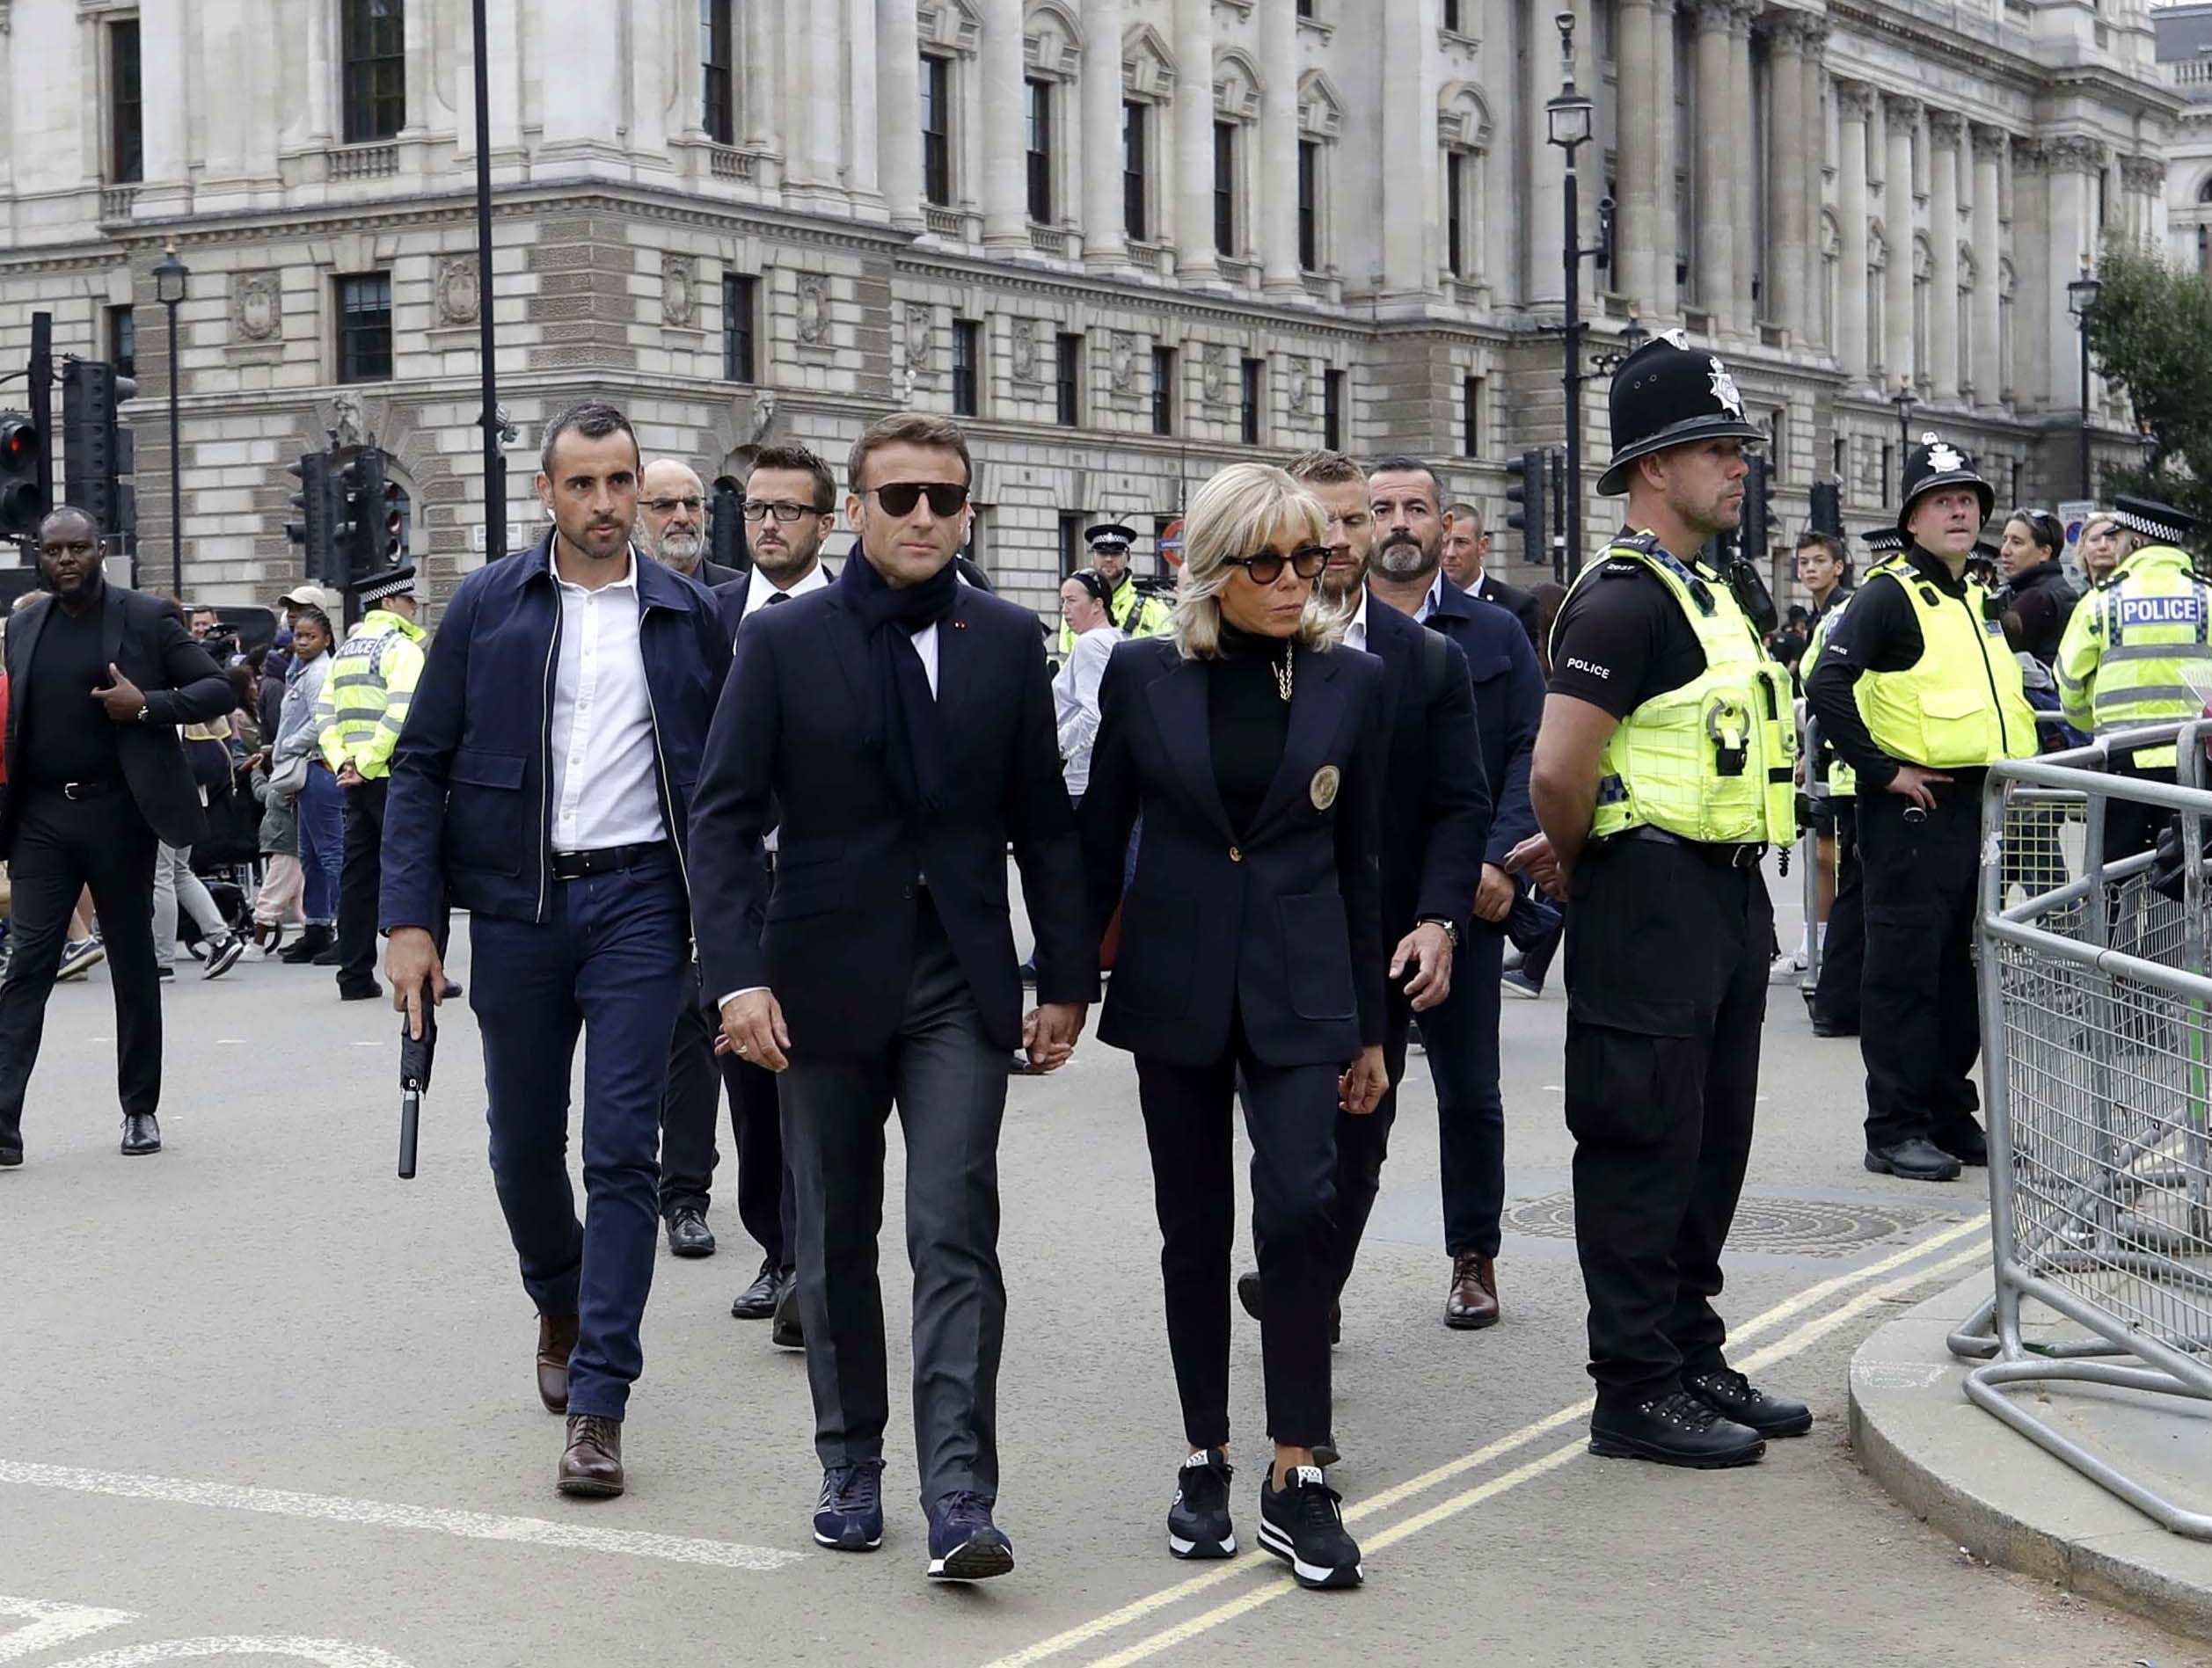 French President Emmanuel Macron (centre left) and his wife Brigitte Macron arrive at Westminster Hall to pay their respects to Britain’s late Queen Elizabeth II.  Photo: EPA-EFE/Olivier Hoslet